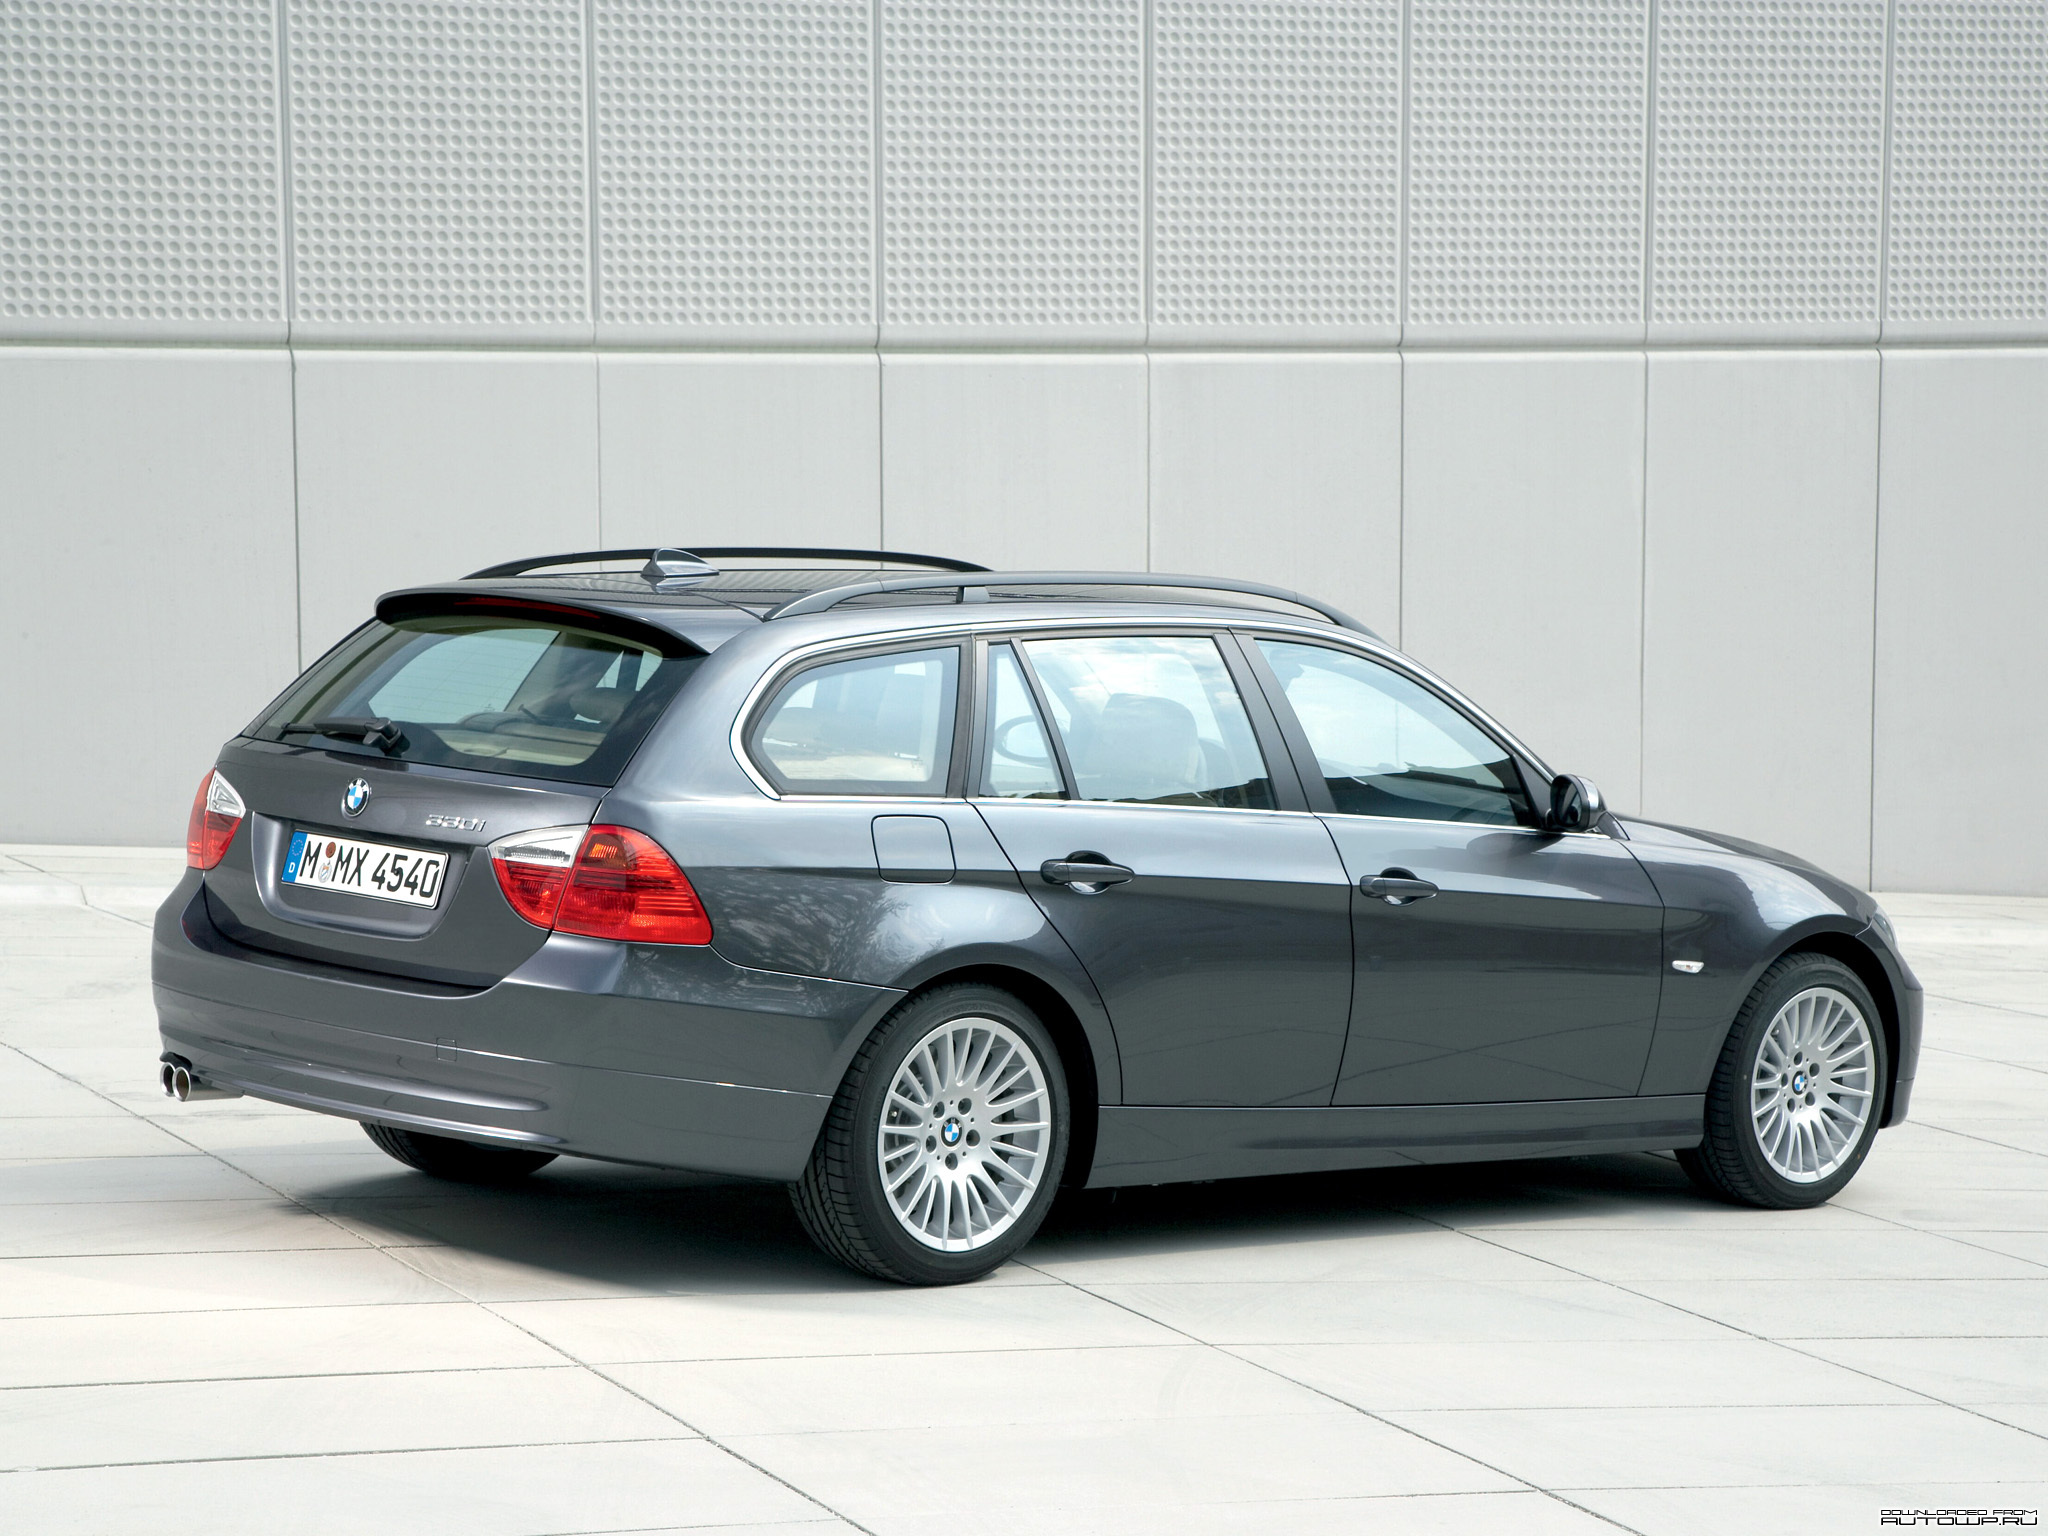 BMW 3series E91 Touring photos PhotoGallery with 61